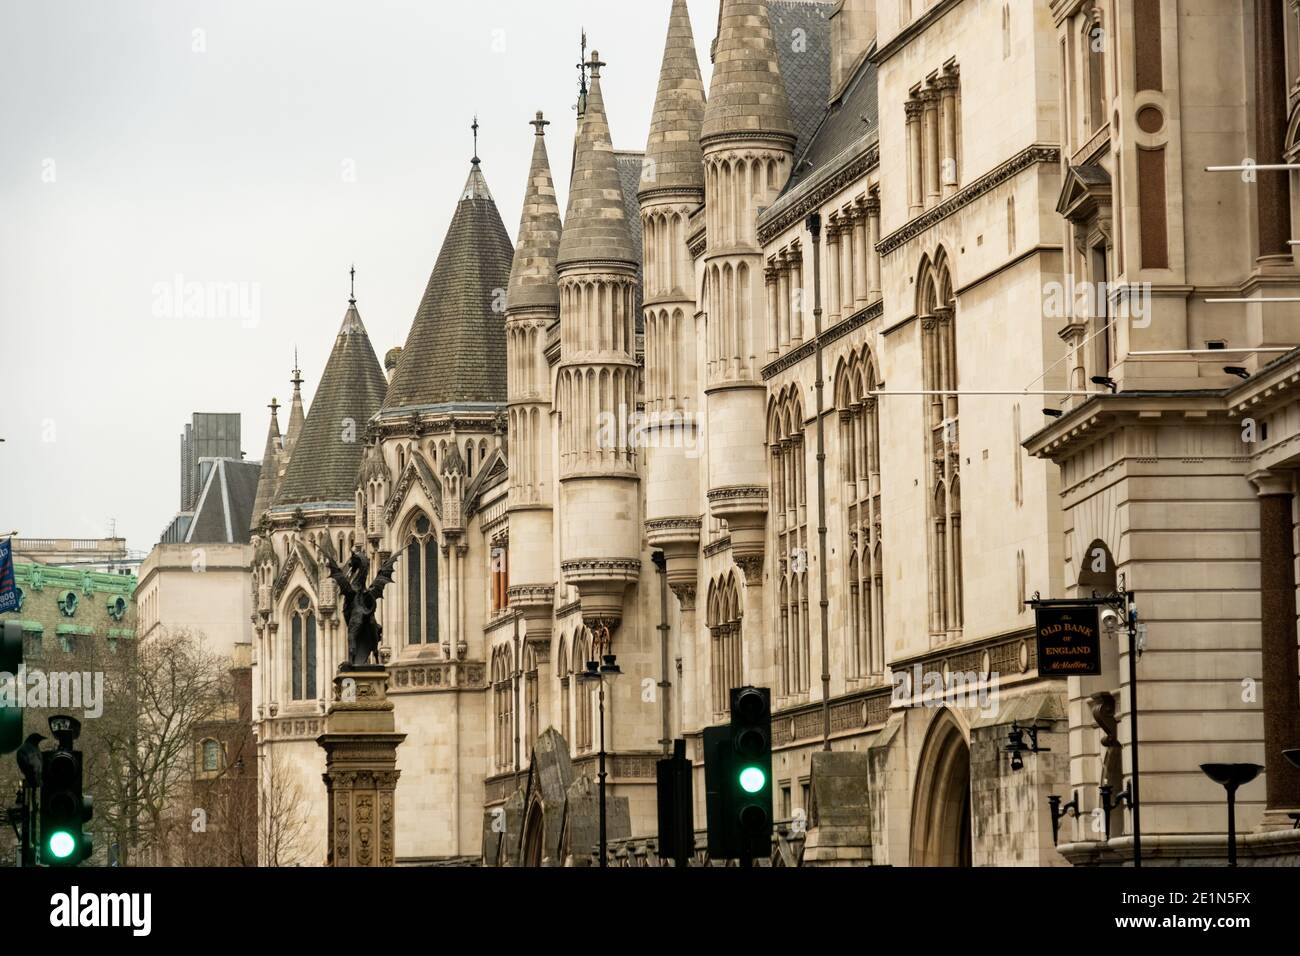 London -Royal Courts of Justice on Fleet Street Stock Photo